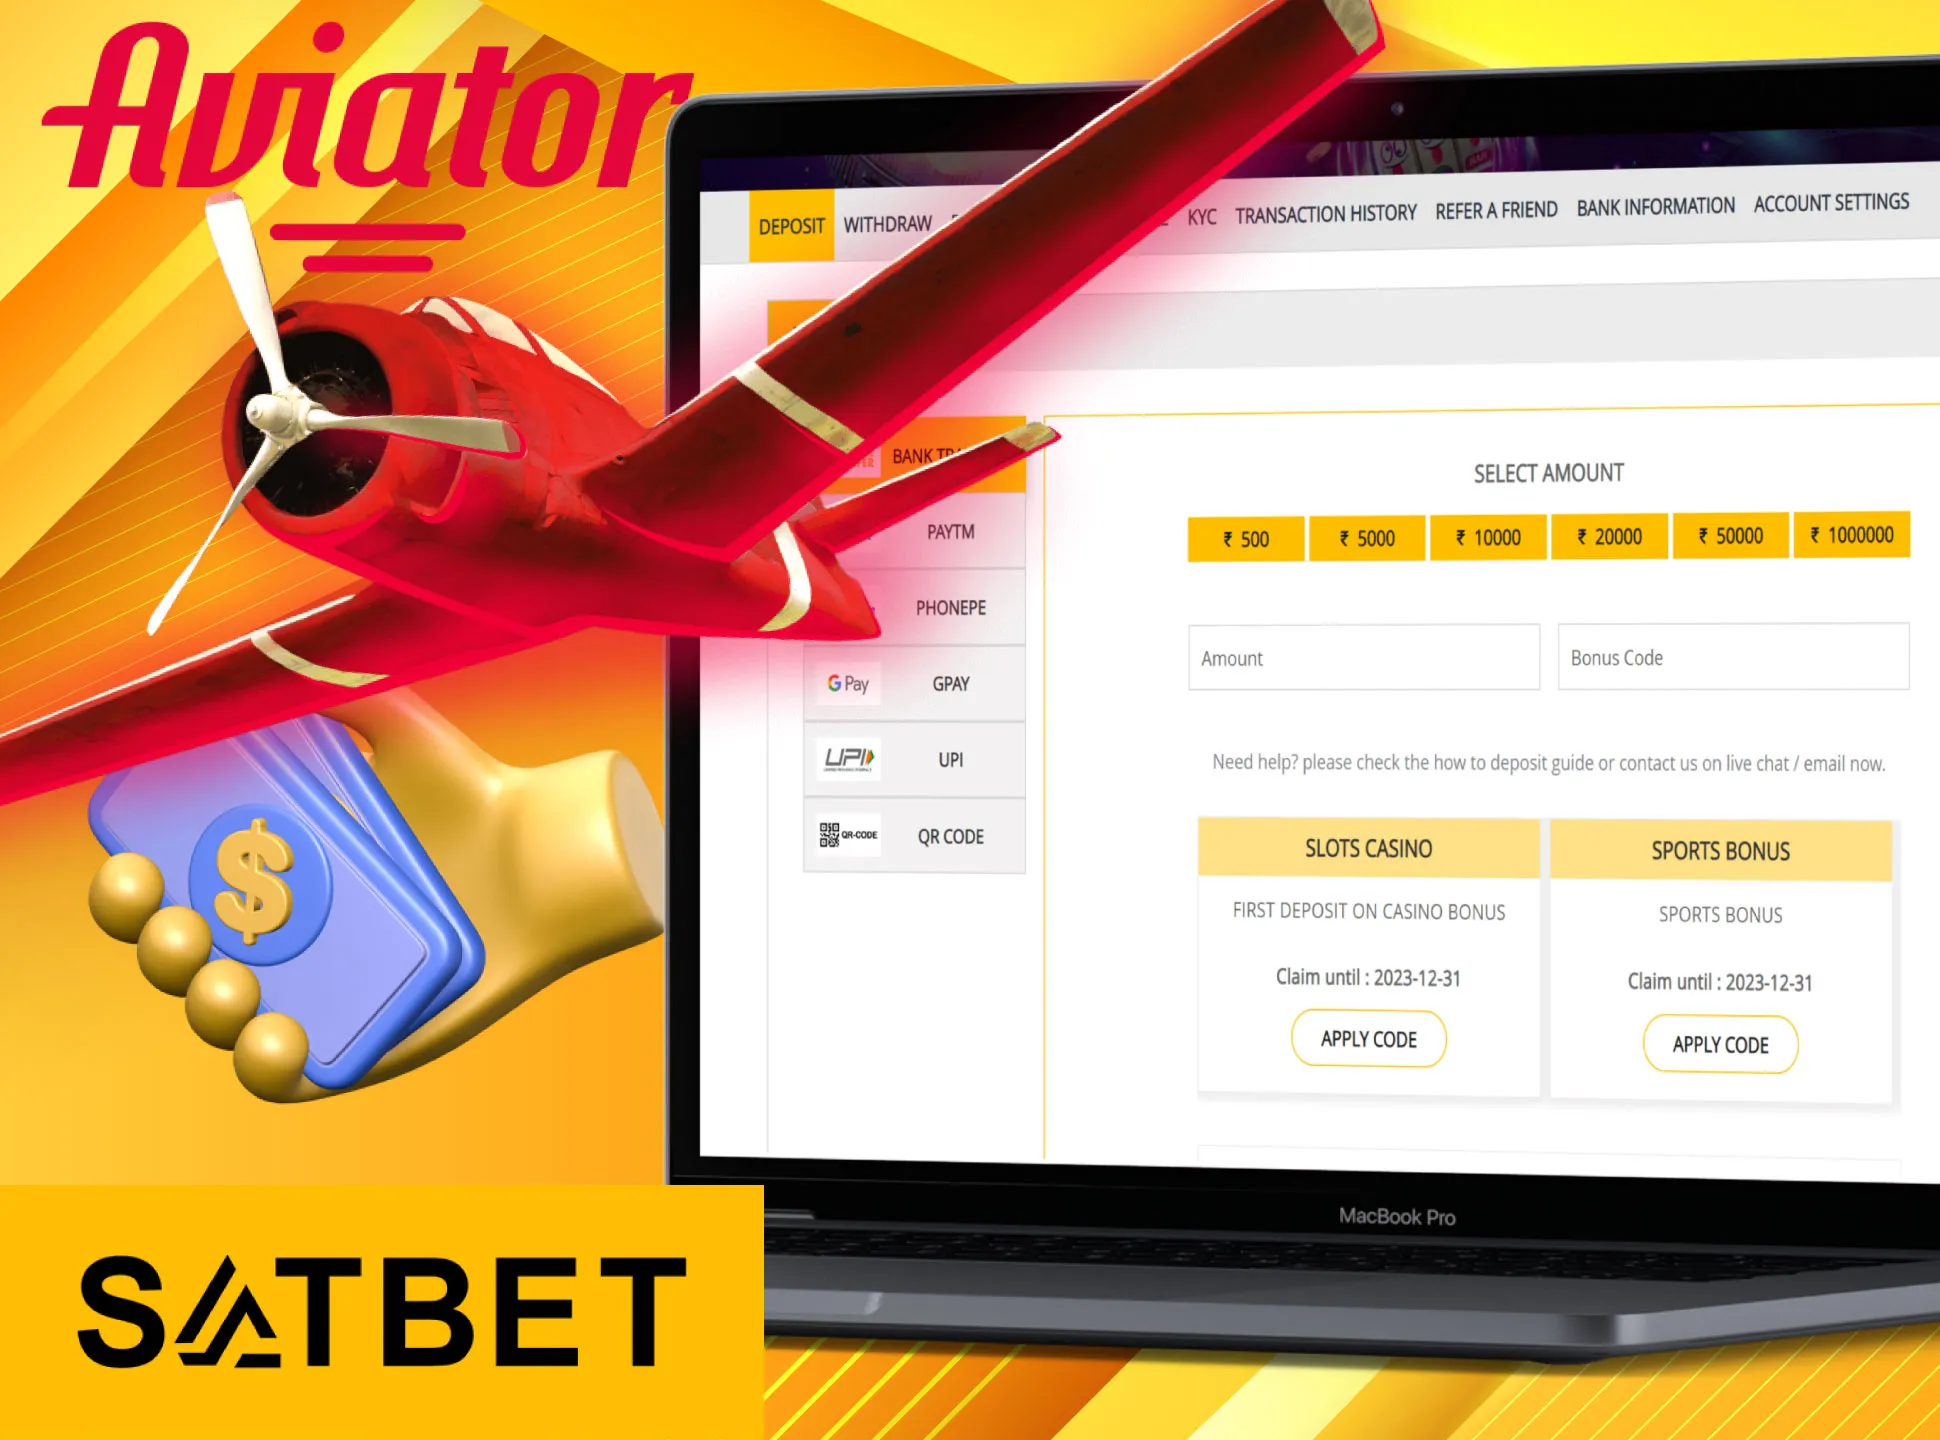 Deposit and withdraw after playing the Aviator game at the Satbet.